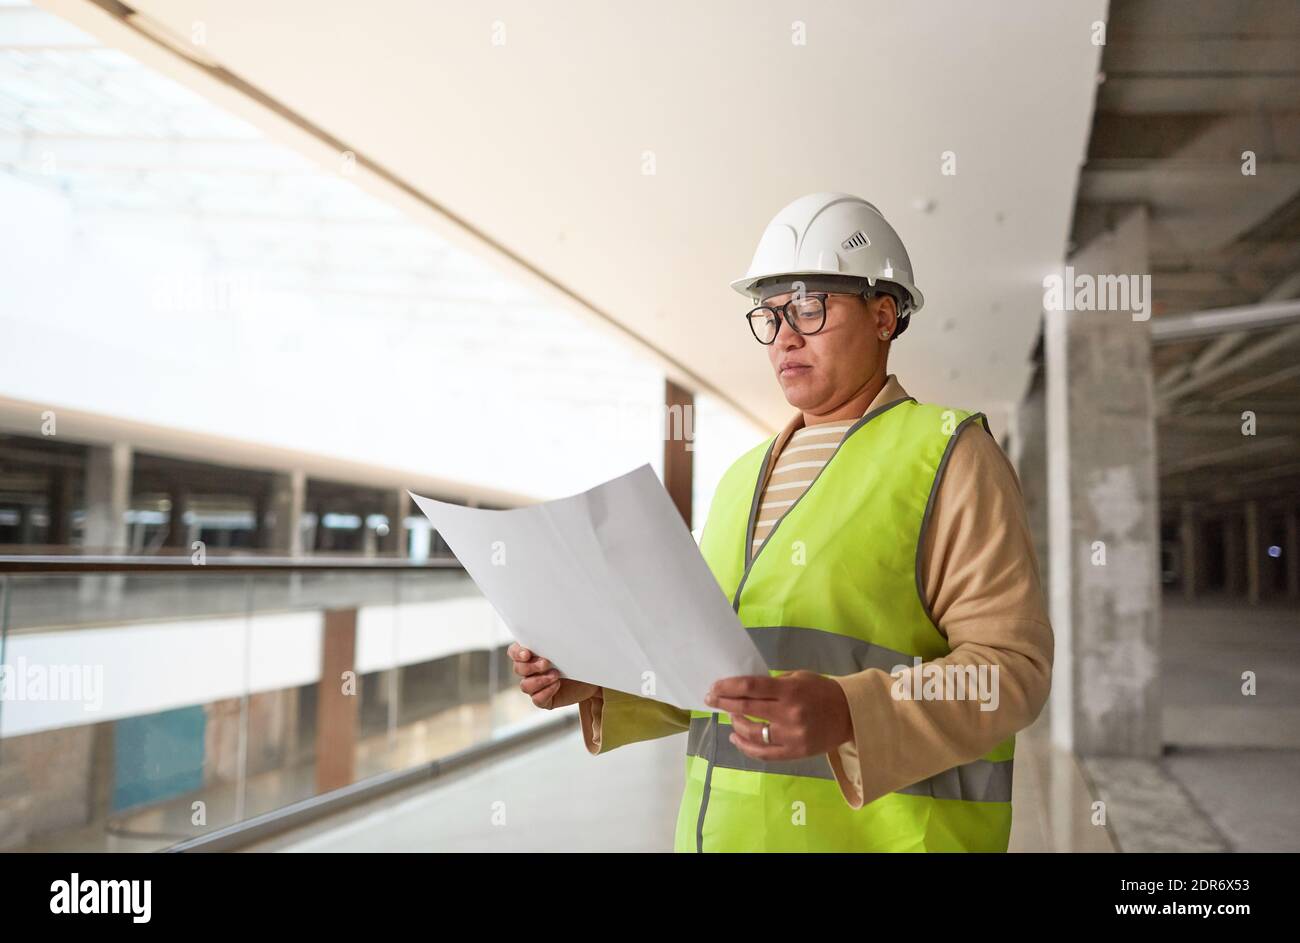 Waist up portrait of mixed-race female engineer holding blueprints while working on construction site, copy space Stock Photo